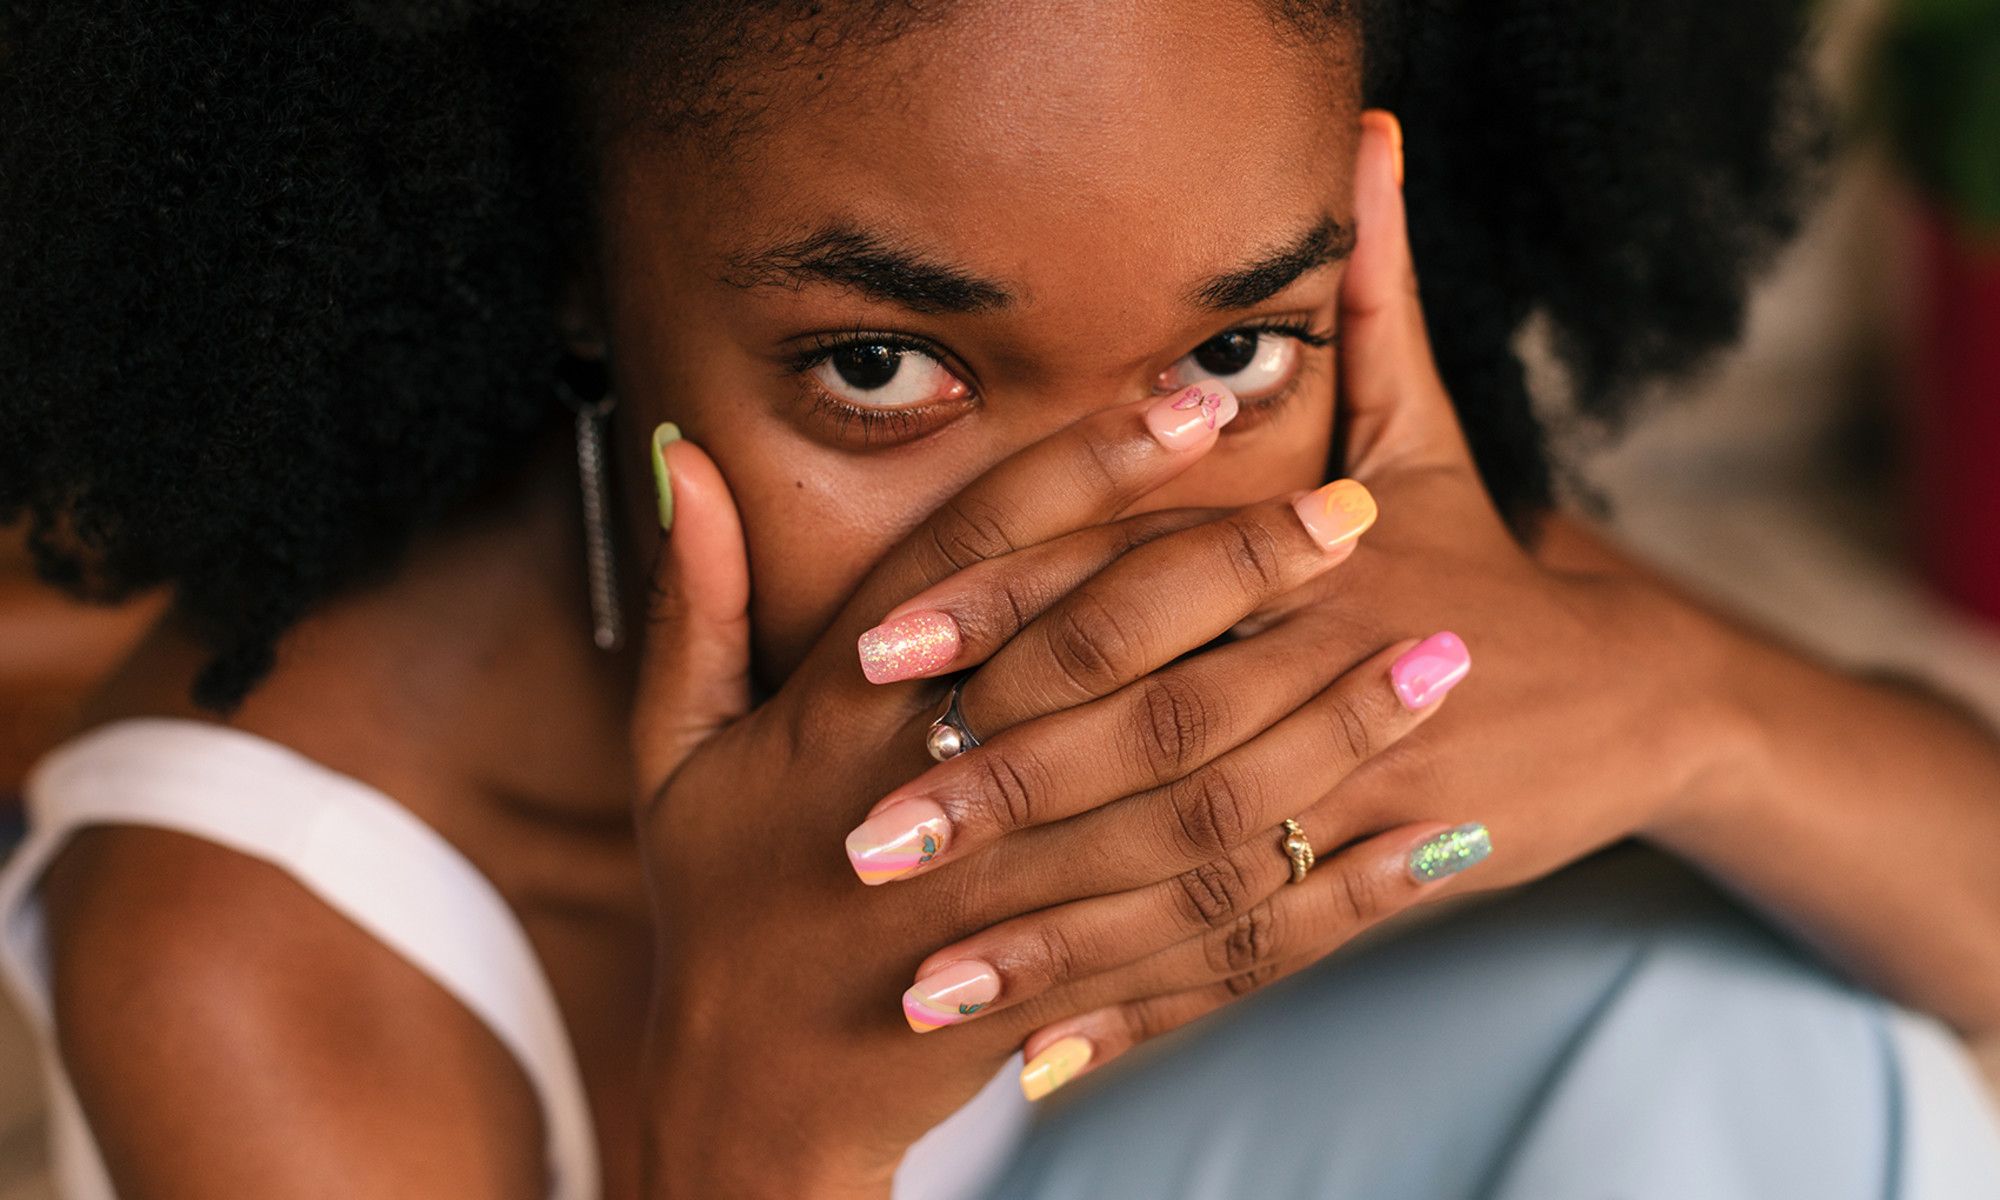 How To Stop Biting Nails: 8 Dermatologist-Approved Tips | mindbodygreen